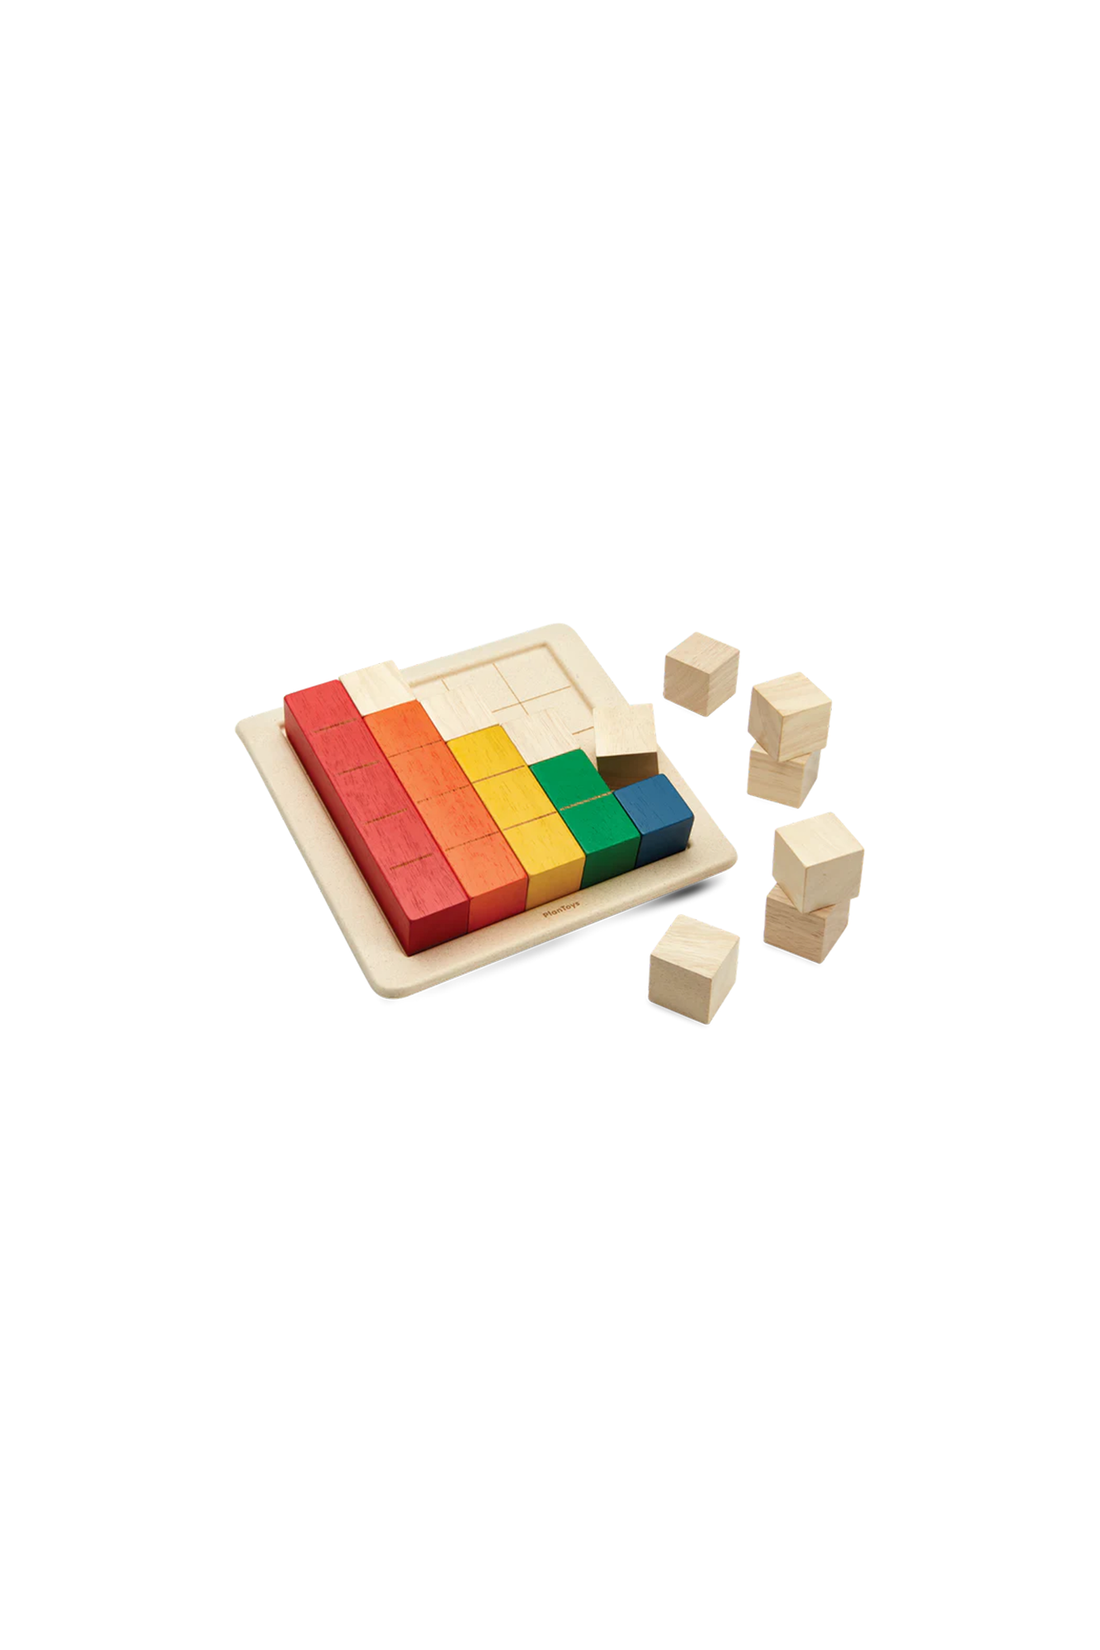 COLORED COUNTING BLOCKS - UNIT LINK